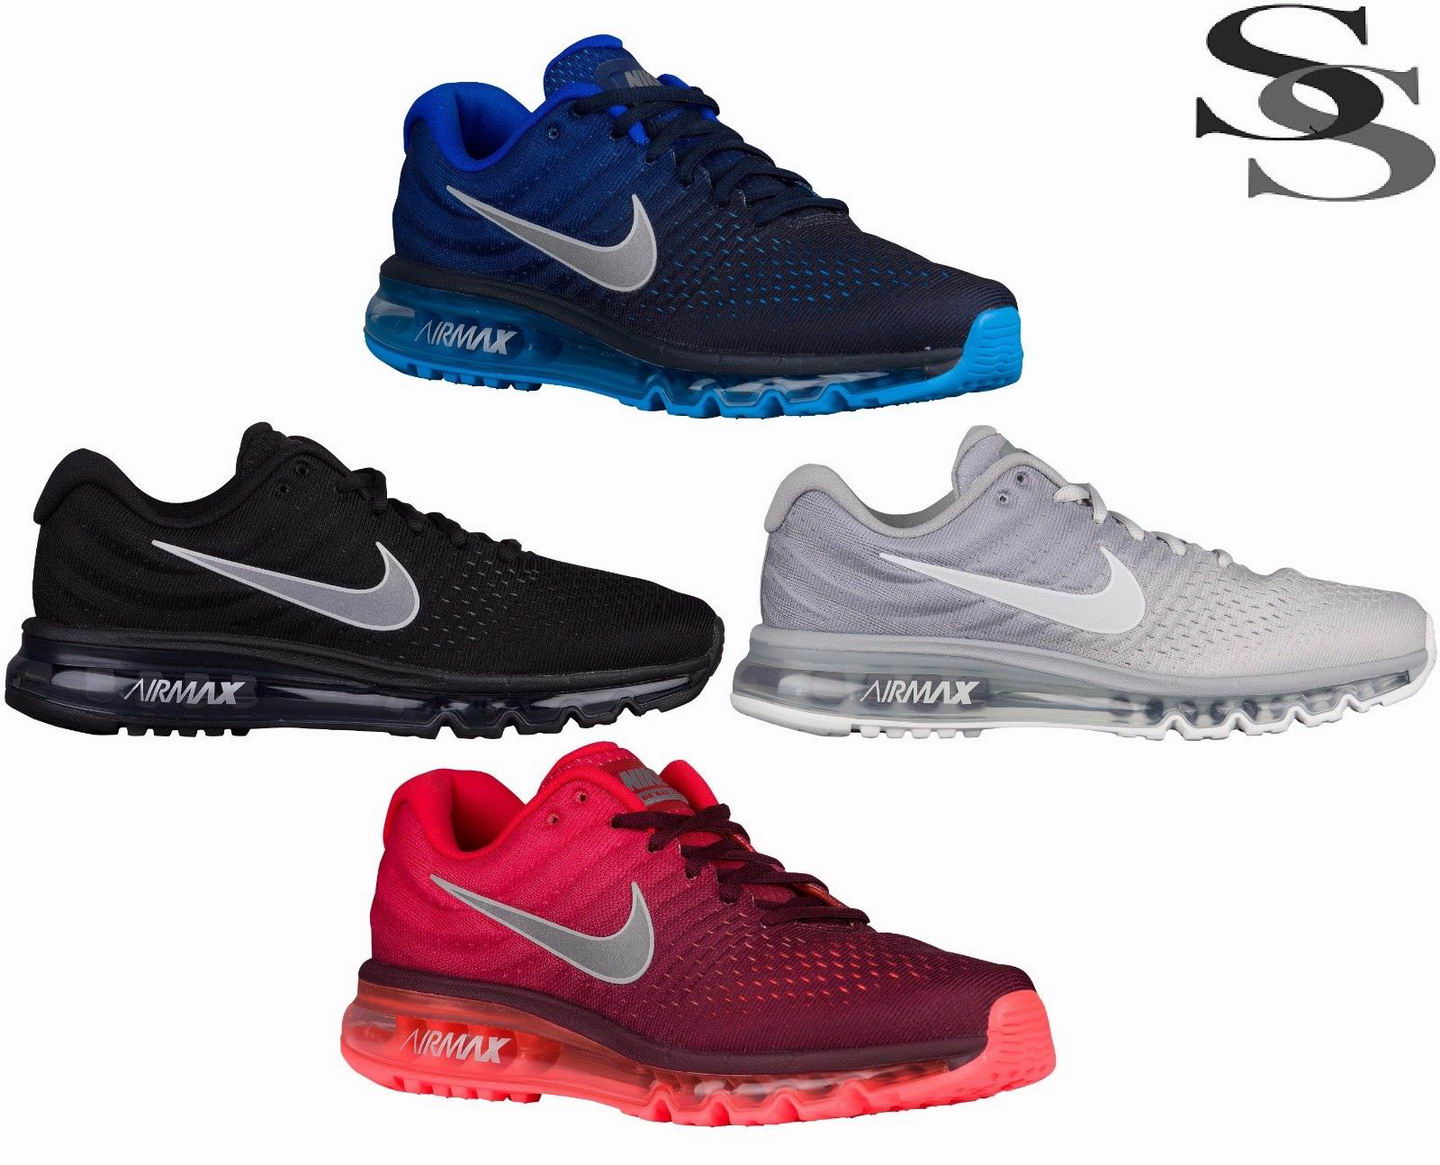 www france nike chaussures com, Chaussures Nike France - Nike Air Max 2017 - Hommes Chaussures de course confortable Sneakers Nouvel